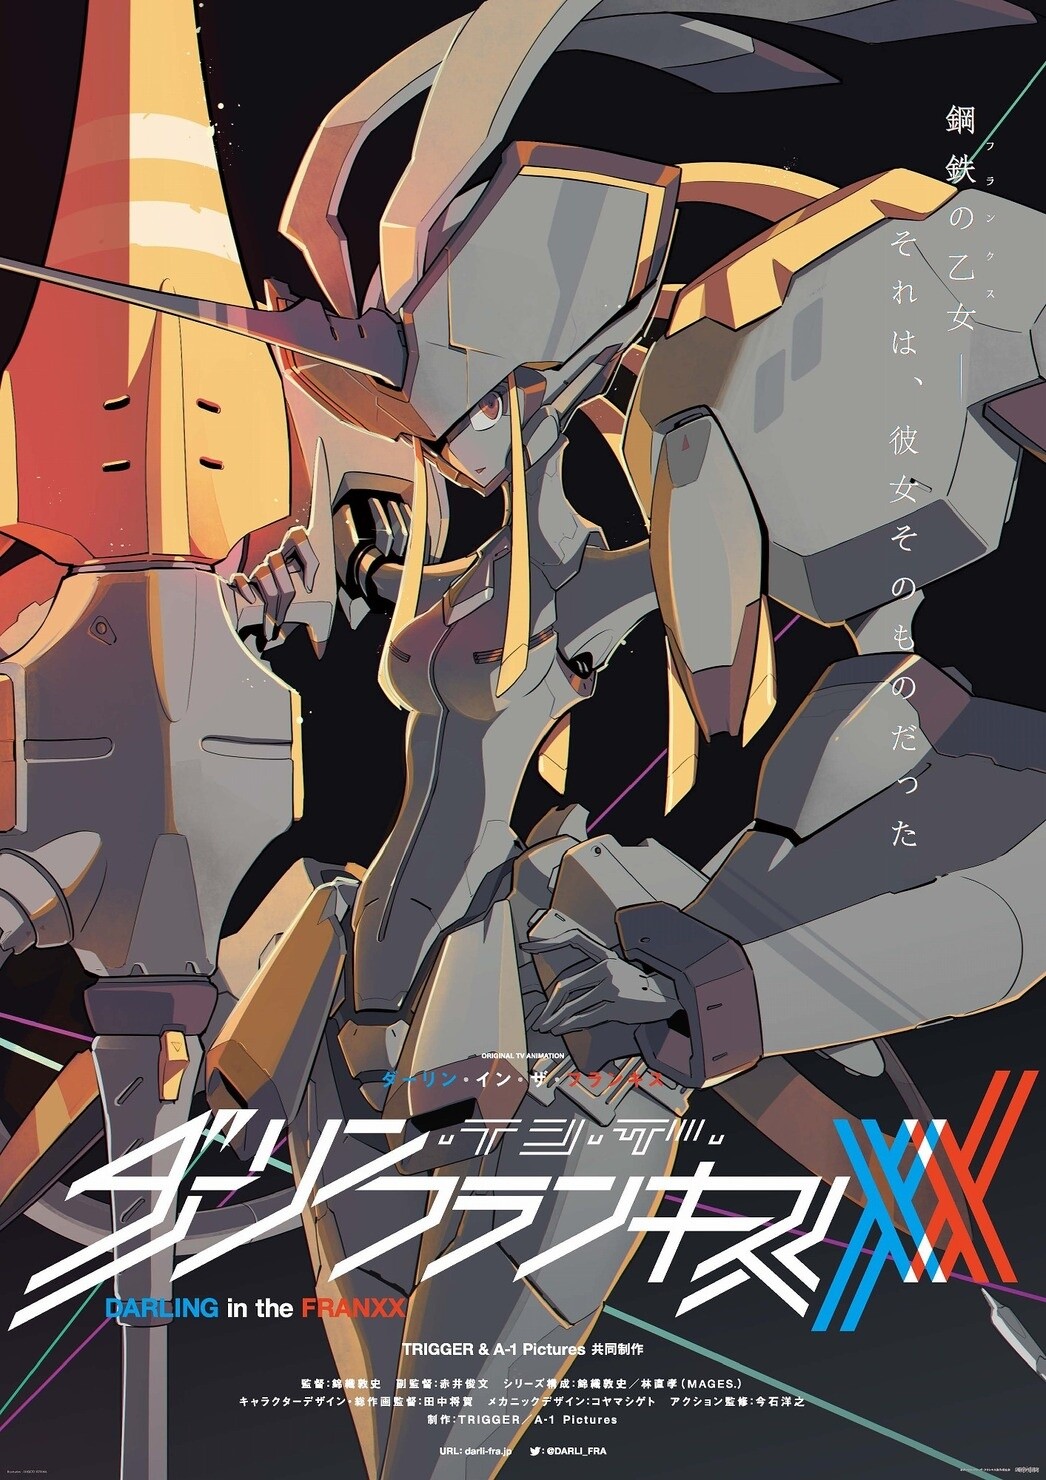 DARLING in the FRANXX Reveals New Character PV!, Anime News